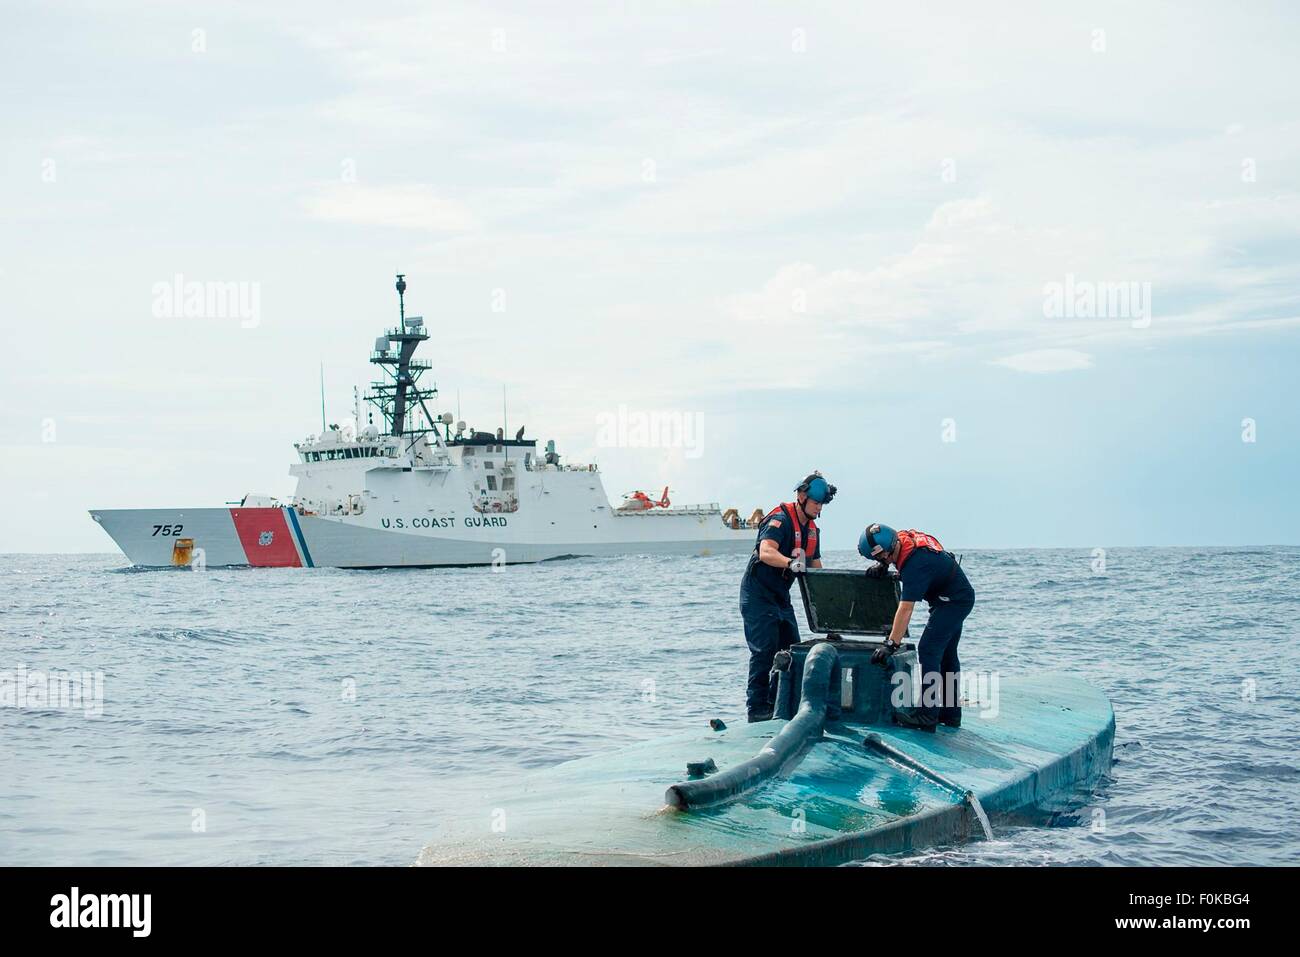 A US Coast Guard boarding team from the USCG Cutter Stratton investigates a self-propelled semi-submersible submarine carrying 6 tons of cocaine interdicted in international waters July 19, 2015 off the coast of Central America. Stock Photo